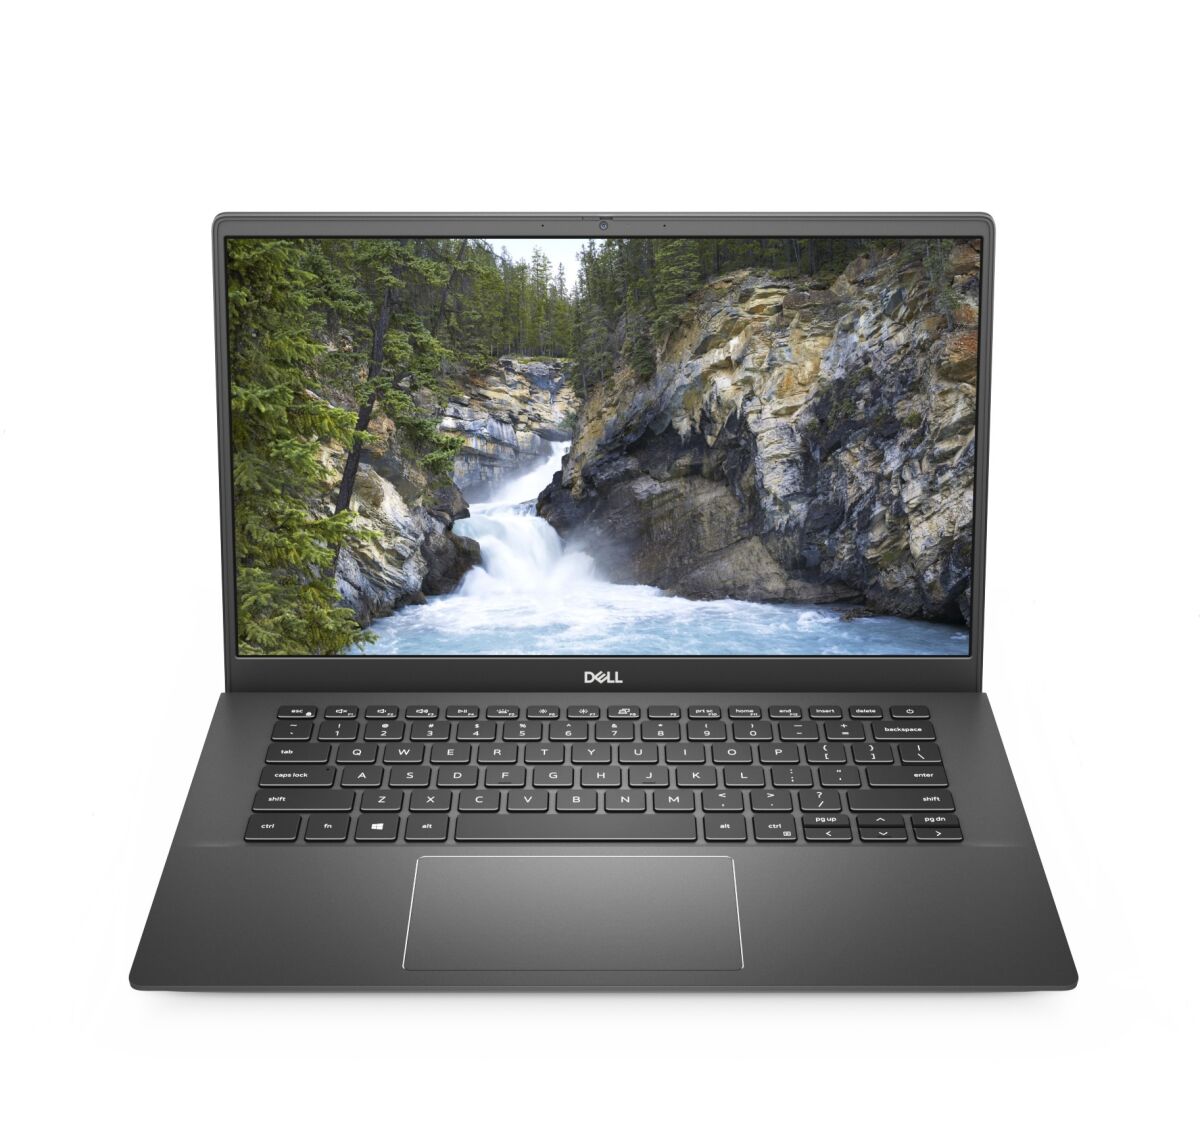 DELL Vostro 5401 - SBO-D553503WIN9 laptop specifications